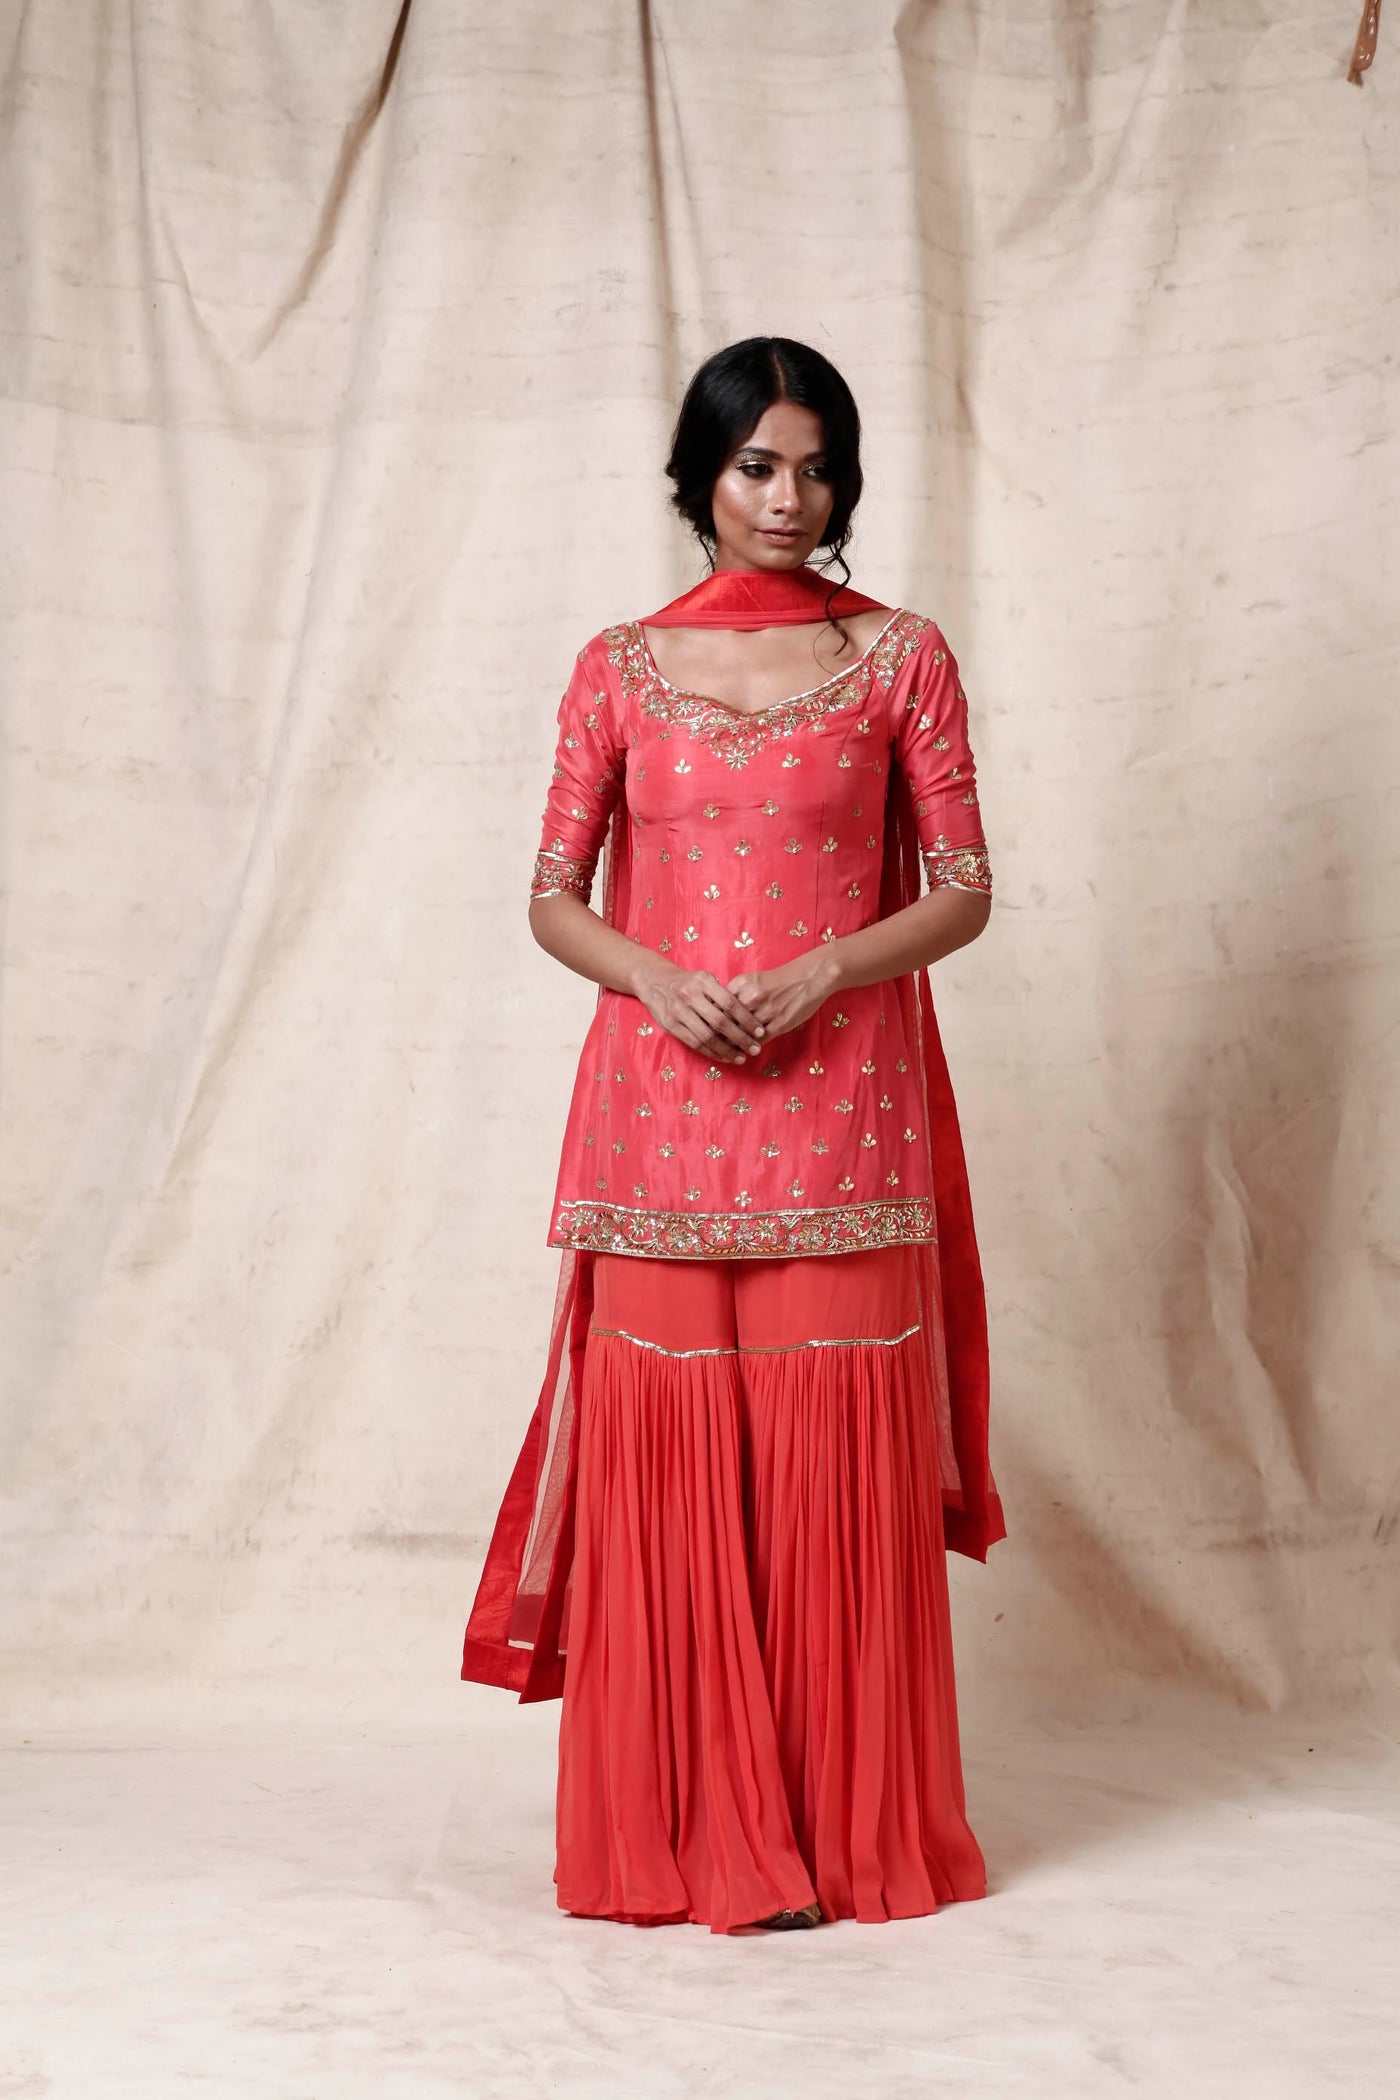 Coral Sharara Set Indian Clothing in Denver, CO, Aurora, CO, Boulder, CO, Fort Collins, CO, Colorado Springs, CO, Parker, CO, Highlands Ranch, CO, Cherry Creek, CO, Centennial, CO, and Longmont, CO. NATIONWIDE SHIPPING USA- India Fashion X